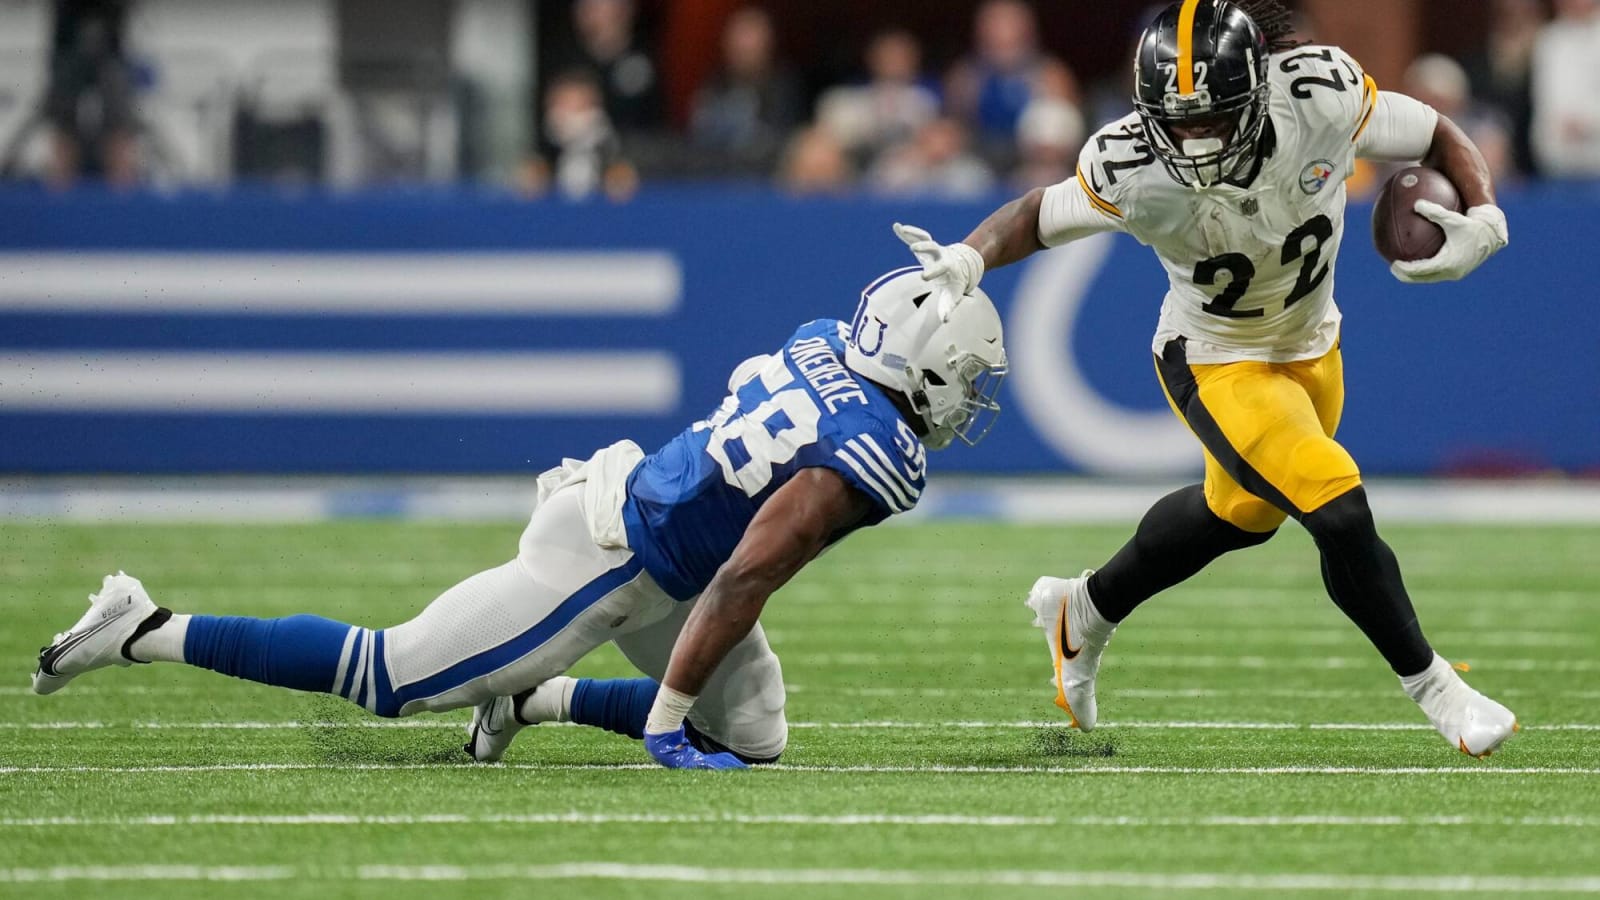 Kordell Stewart Touched On Steelers’ RB Benny Snell, Jr. Being A Better Fit For The Offense Than Najee Harris